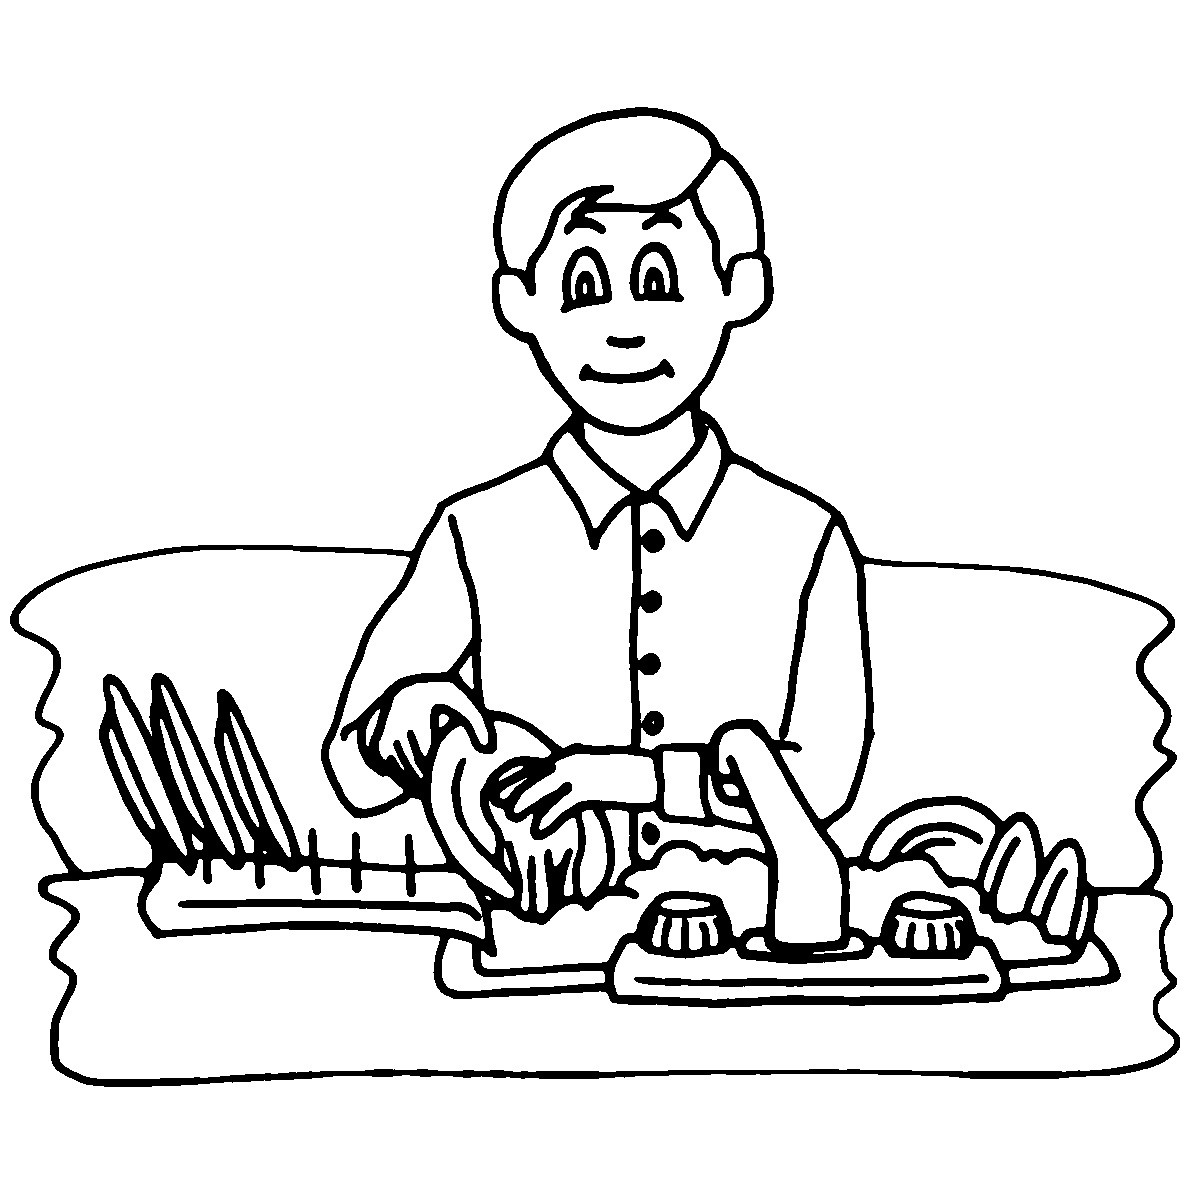 Preschool Coloring Sheets With Household Chores On Them
 Household Chores Cliparts